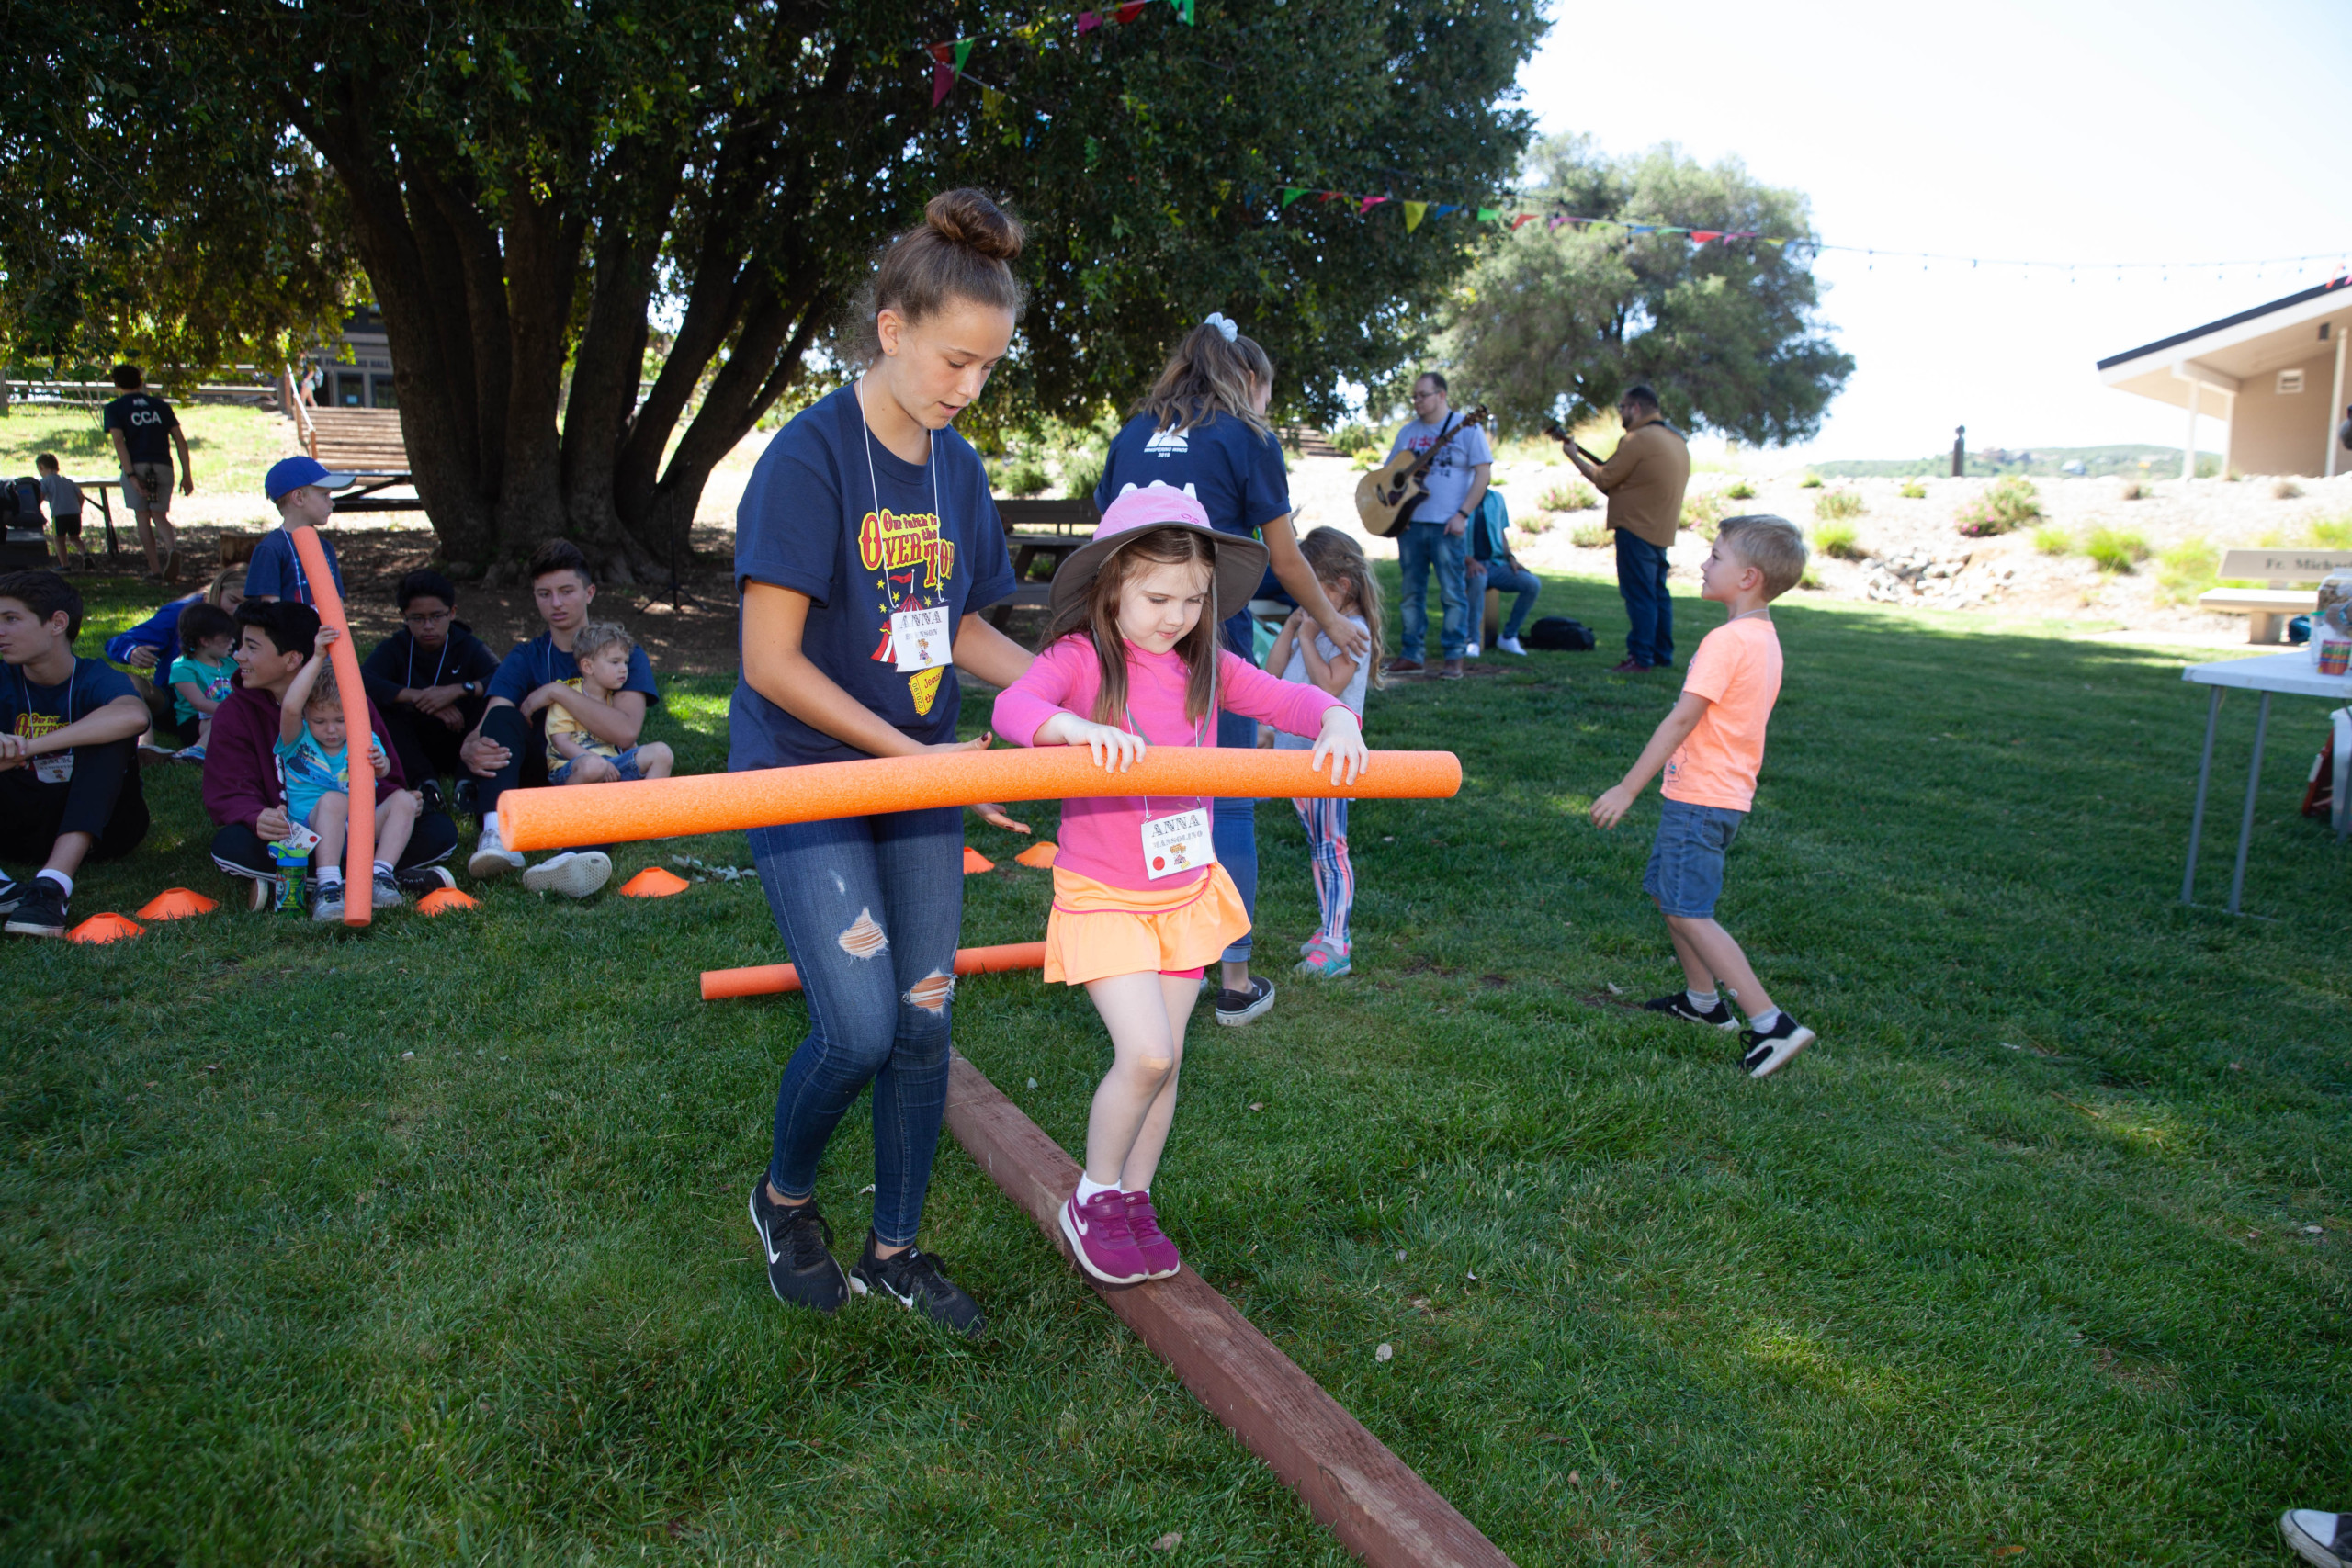 Girl and CCA on balance beam meadow game during Family Camp